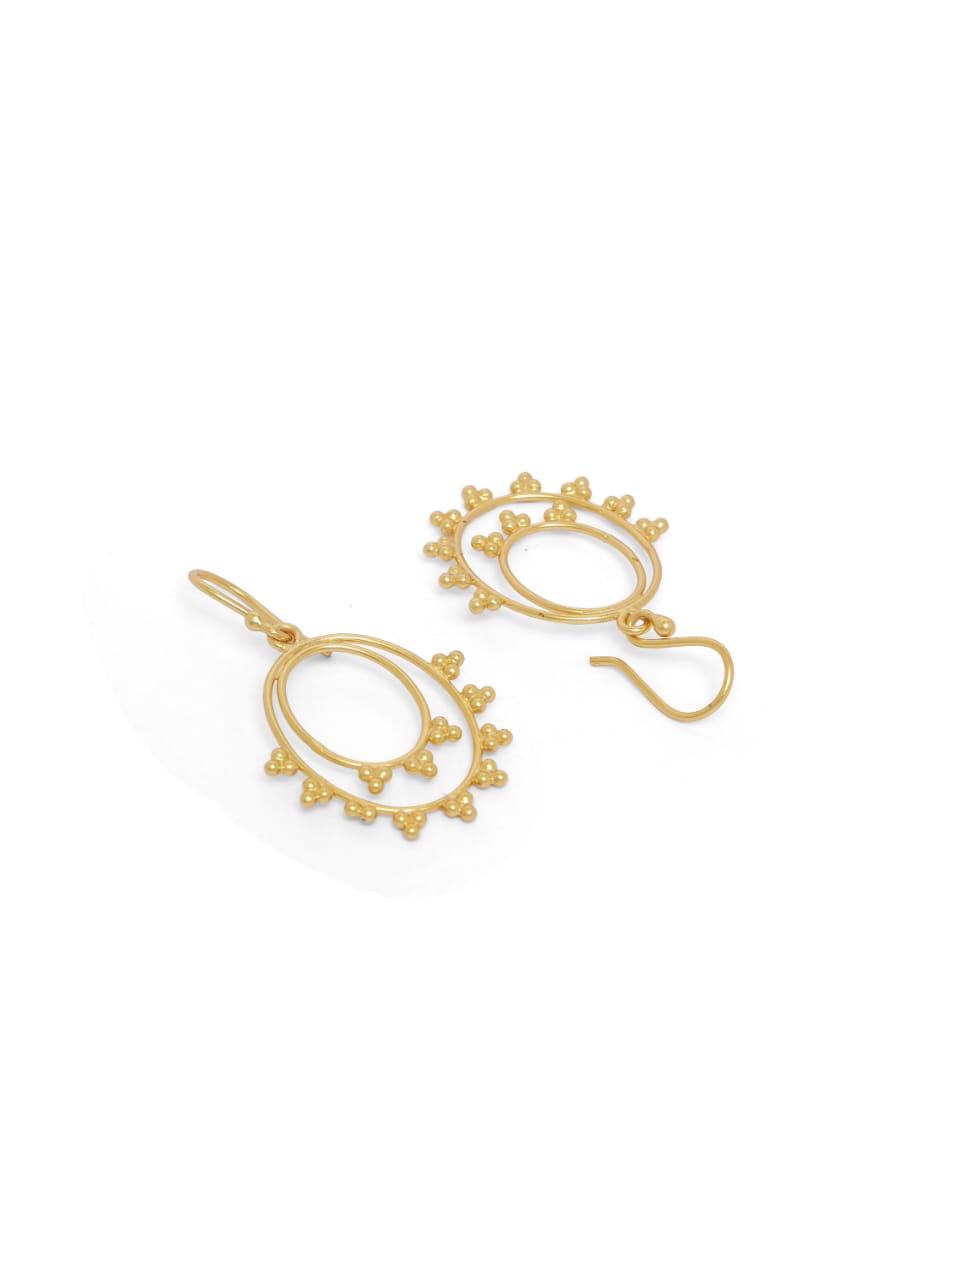 92.5 sterling Silver Gold plated rawa hoops earrings.